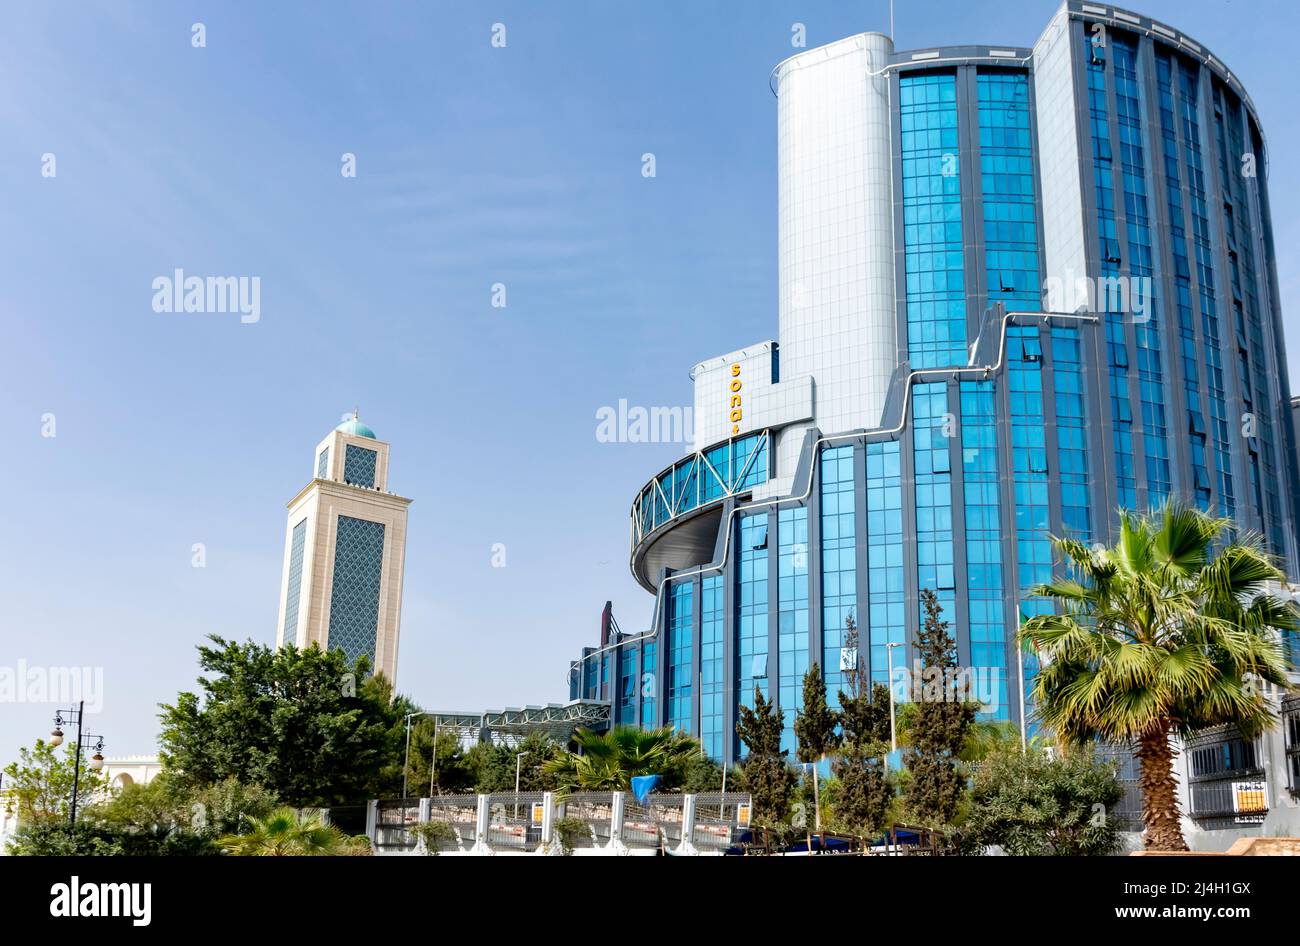 Sonatrach AVAL  and Grand Mosque Abdelhamid Ibn Badis minaret. Headquarters of the Sonatrach company, a low angle view of the modern buildings. Stock Photo